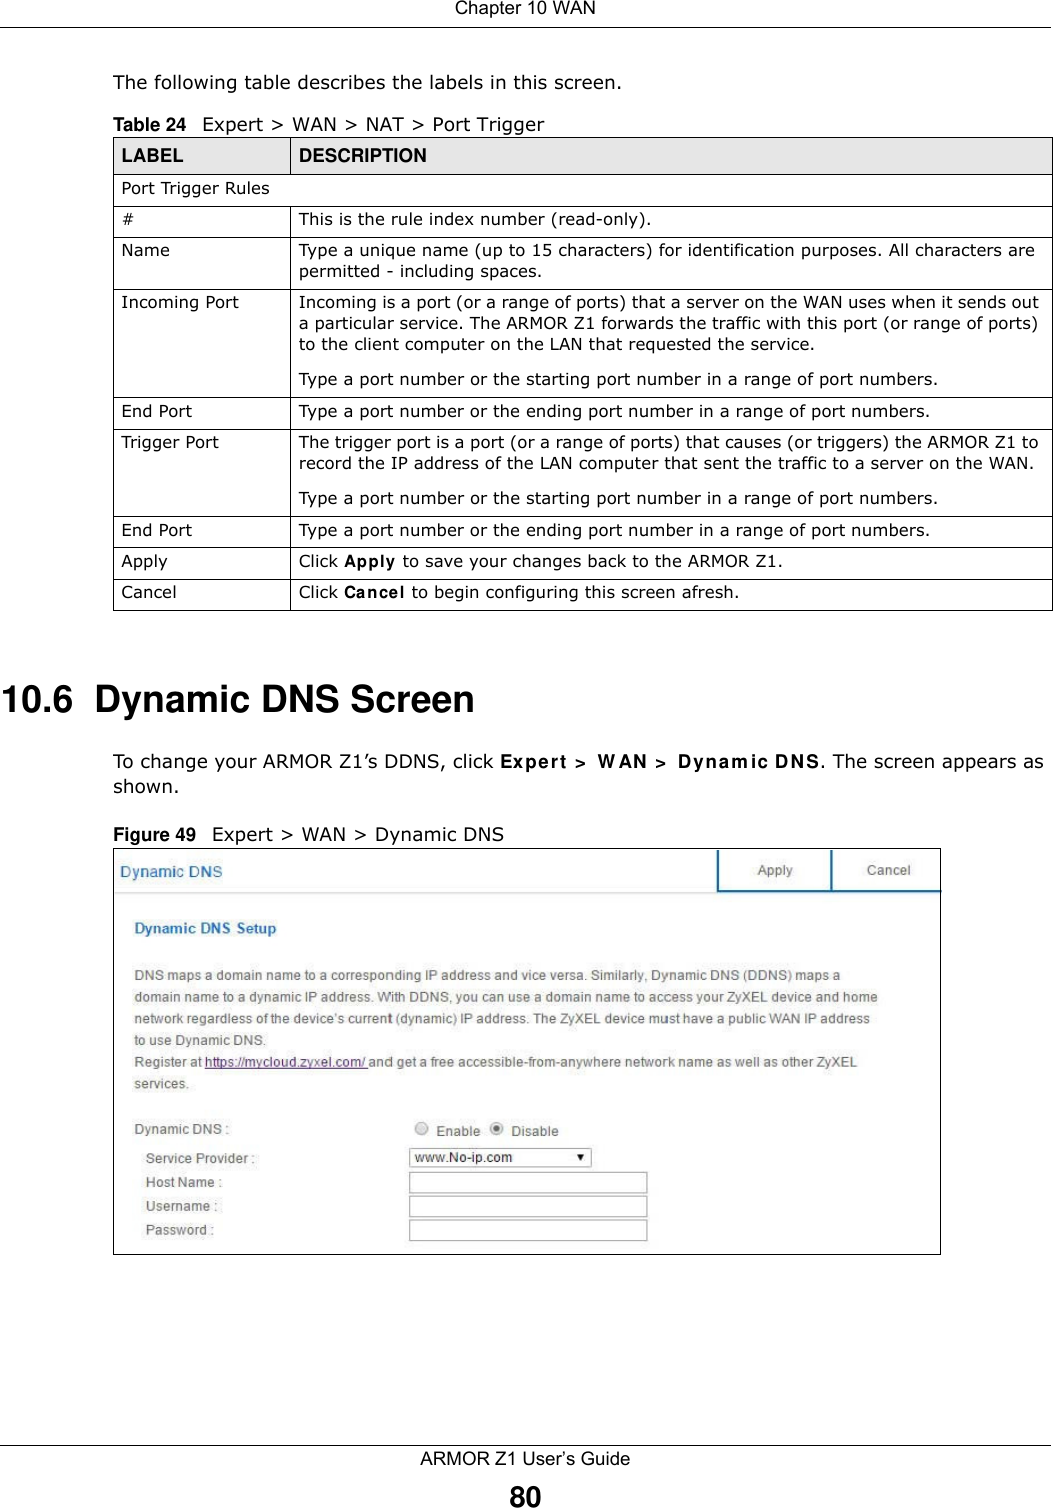 Chapter 10 WANARMOR Z1 User’s Guide80The following table describes the labels in this screen.10.6  Dynamic DNS ScreenTo change your ARMOR Z1’s DDNS, click Expert &gt; WAN &gt; Dynamic DNS. The screen appears as shown.Figure 49   Expert &gt; WAN &gt; Dynamic DNS Table 24   Expert &gt; WAN &gt; NAT &gt; Port TriggerLABEL DESCRIPTIONPort Trigger Rules#This is the rule index number (read-only).Name Type a unique name (up to 15 characters) for identification purposes. All characters are permitted - including spaces.Incoming Port Incoming is a port (or a range of ports) that a server on the WAN uses when it sends out a particular service. The ARMOR Z1 forwards the traffic with this port (or range of ports) to the client computer on the LAN that requested the service. Type a port number or the starting port number in a range of port numbers.End Port Type a port number or the ending port number in a range of port numbers.Trigger Port The trigger port is a port (or a range of ports) that causes (or triggers) the ARMOR Z1 to record the IP address of the LAN computer that sent the traffic to a server on the WAN.Type a port number or the starting port number in a range of port numbers.End Port Type a port number or the ending port number in a range of port numbers.Apply Click Apply to save your changes back to the ARMOR Z1.Cancel Click Cancel to begin configuring this screen afresh.